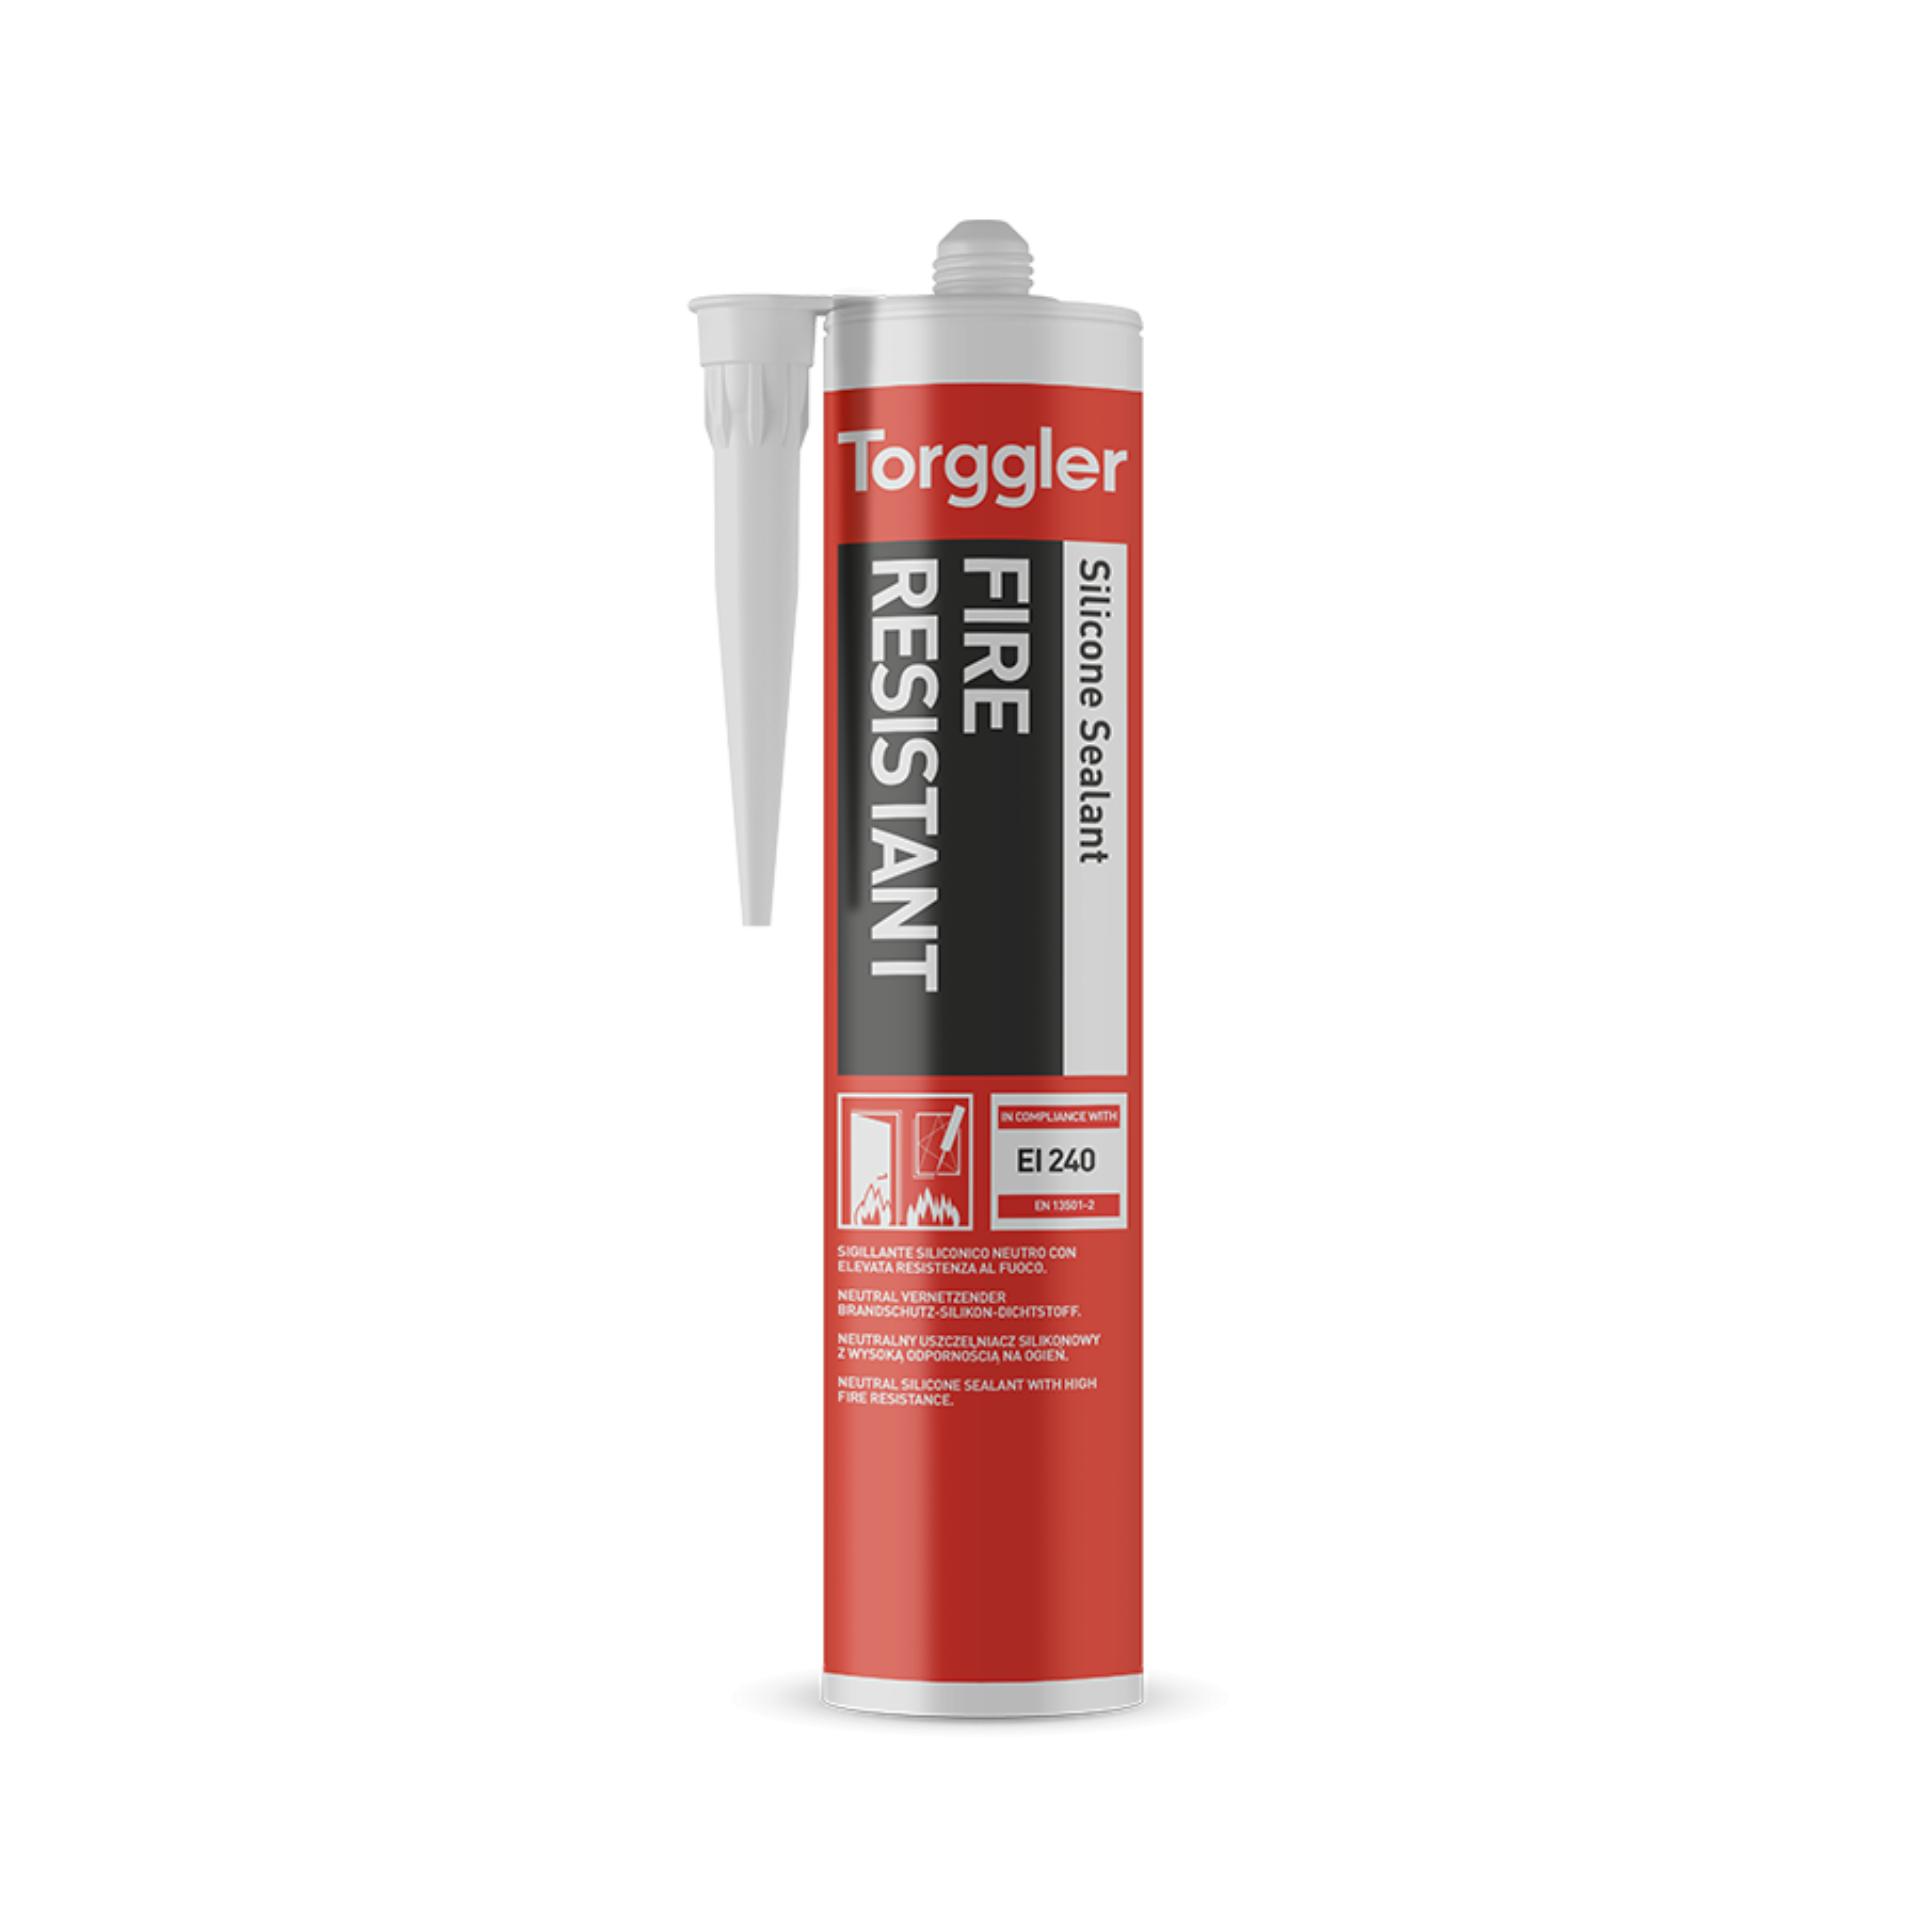 Fire Resistant, Sealants and Adhesives, Sealants and Adhesives, Sealants  and Adhesives, Silicone Sealants, Silicone Sealants and Adhesives, Silicone  Sealants and Adhesives, Sealants